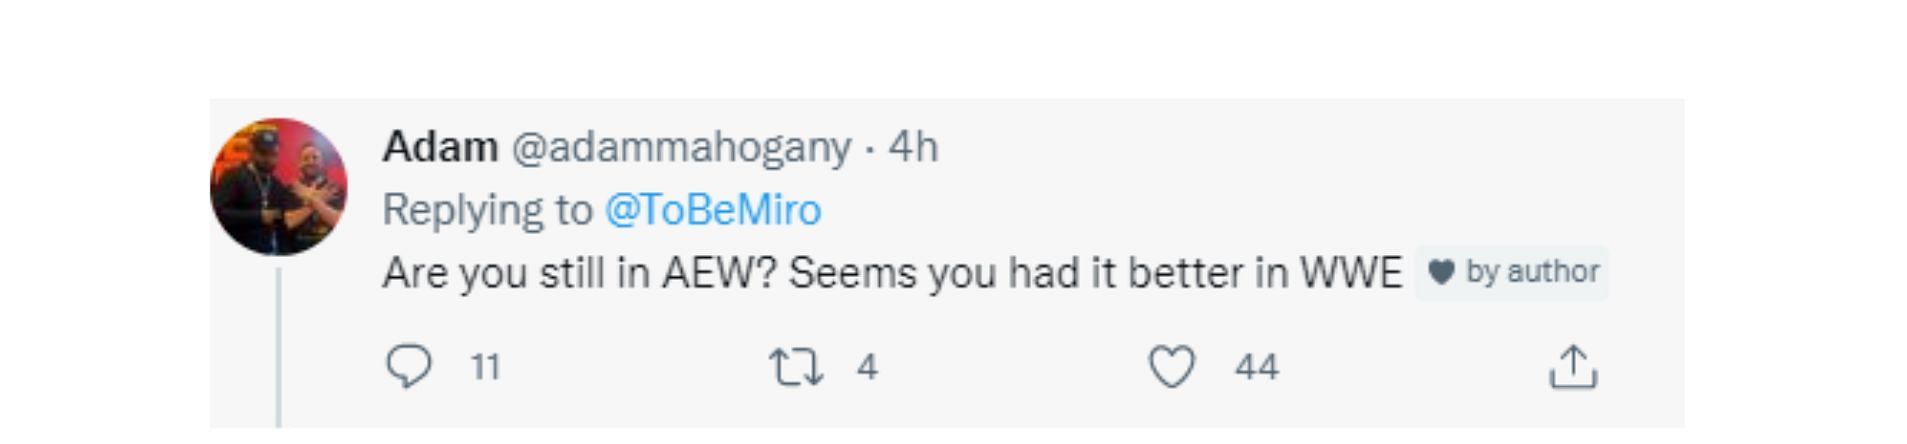 Miro liked the comment suggesting that he was better off in WWE